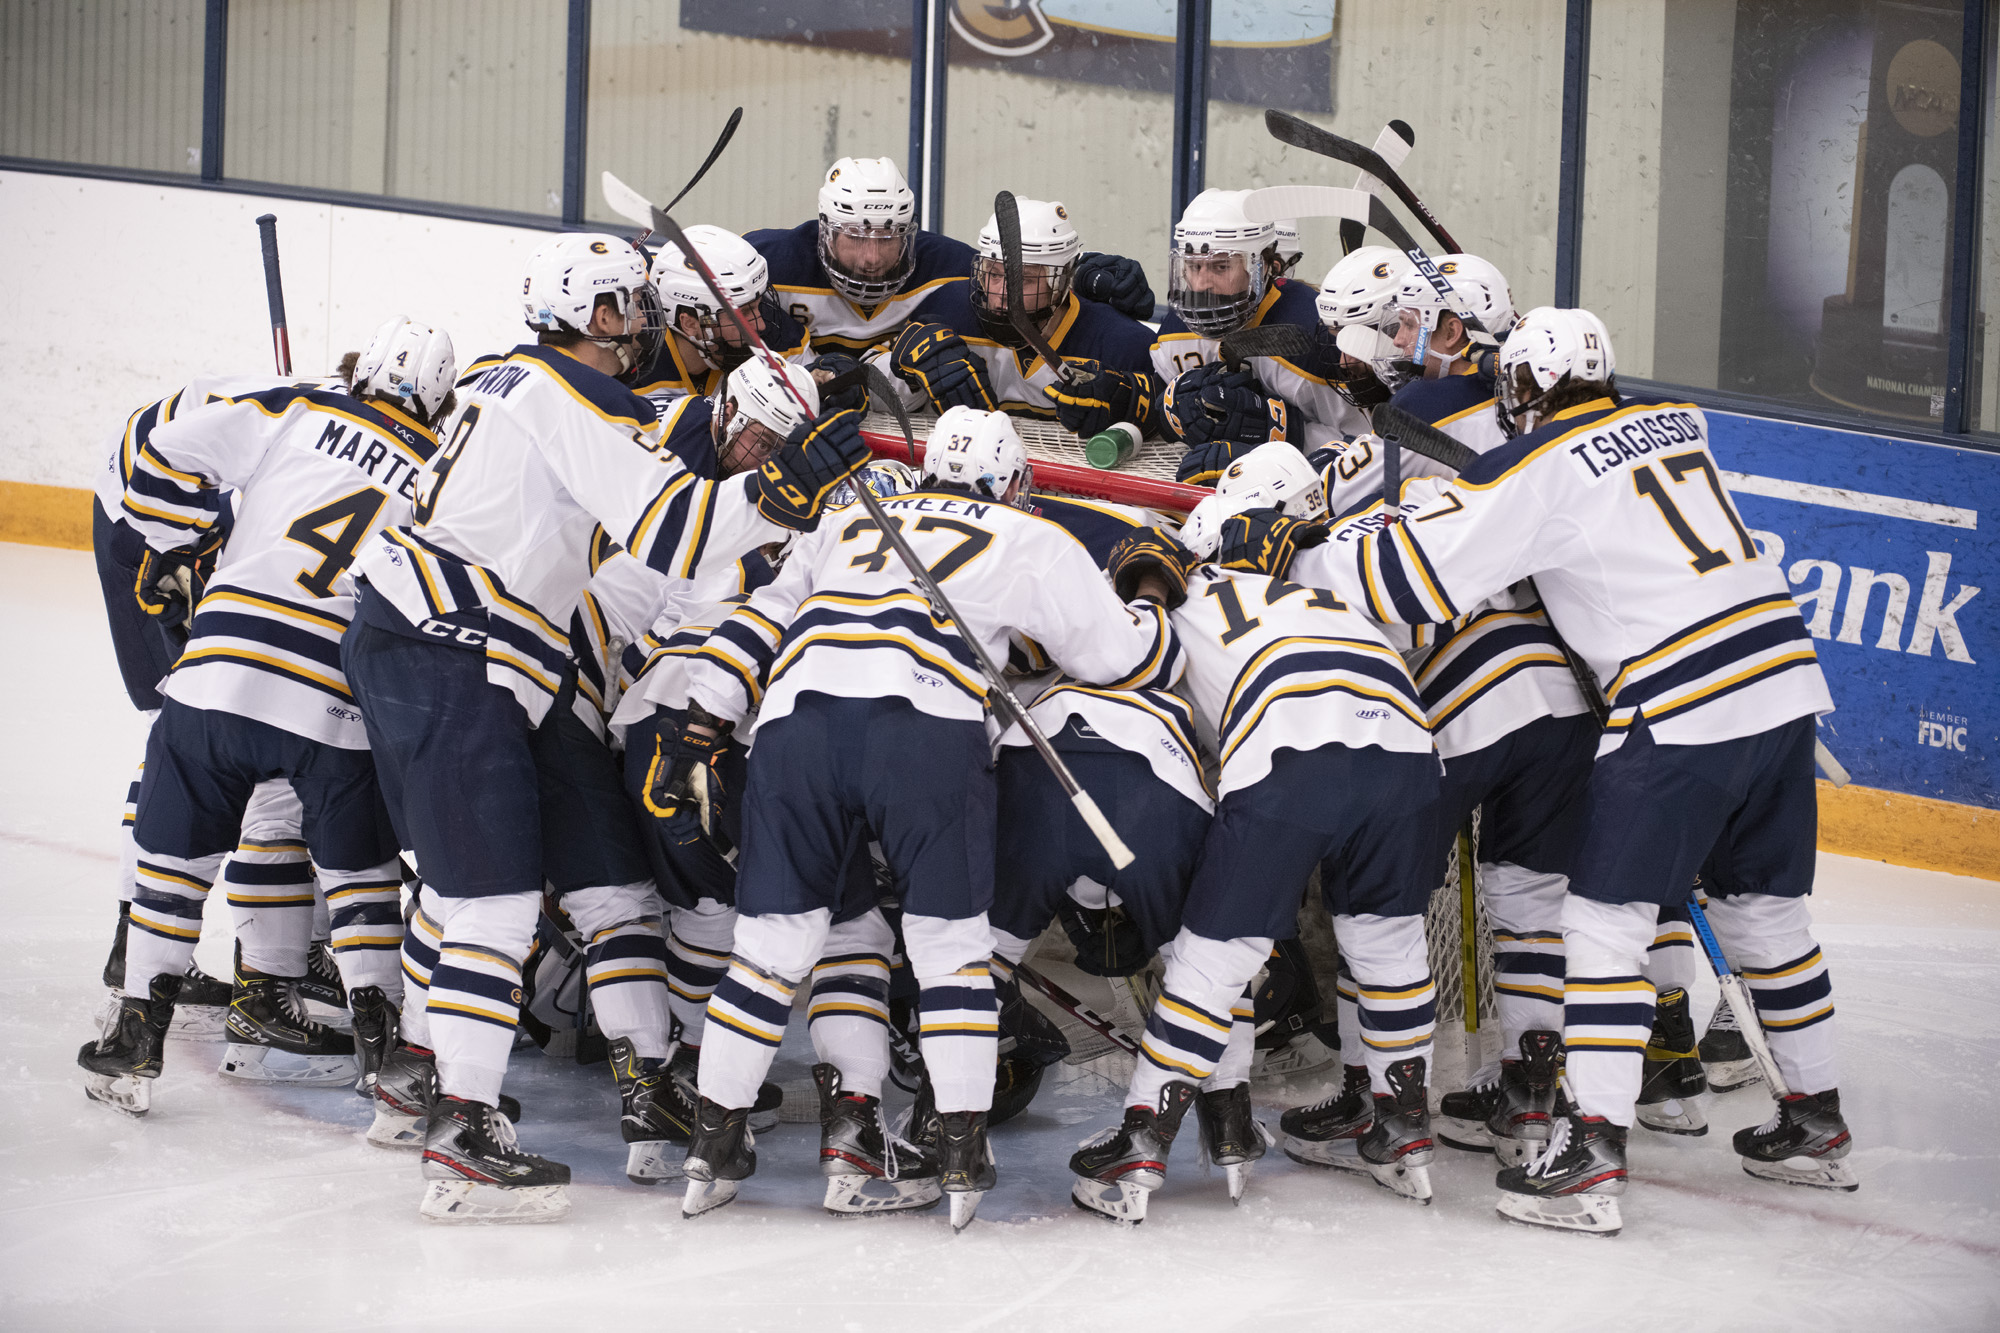 Strong third period propels Blugolds past Northland